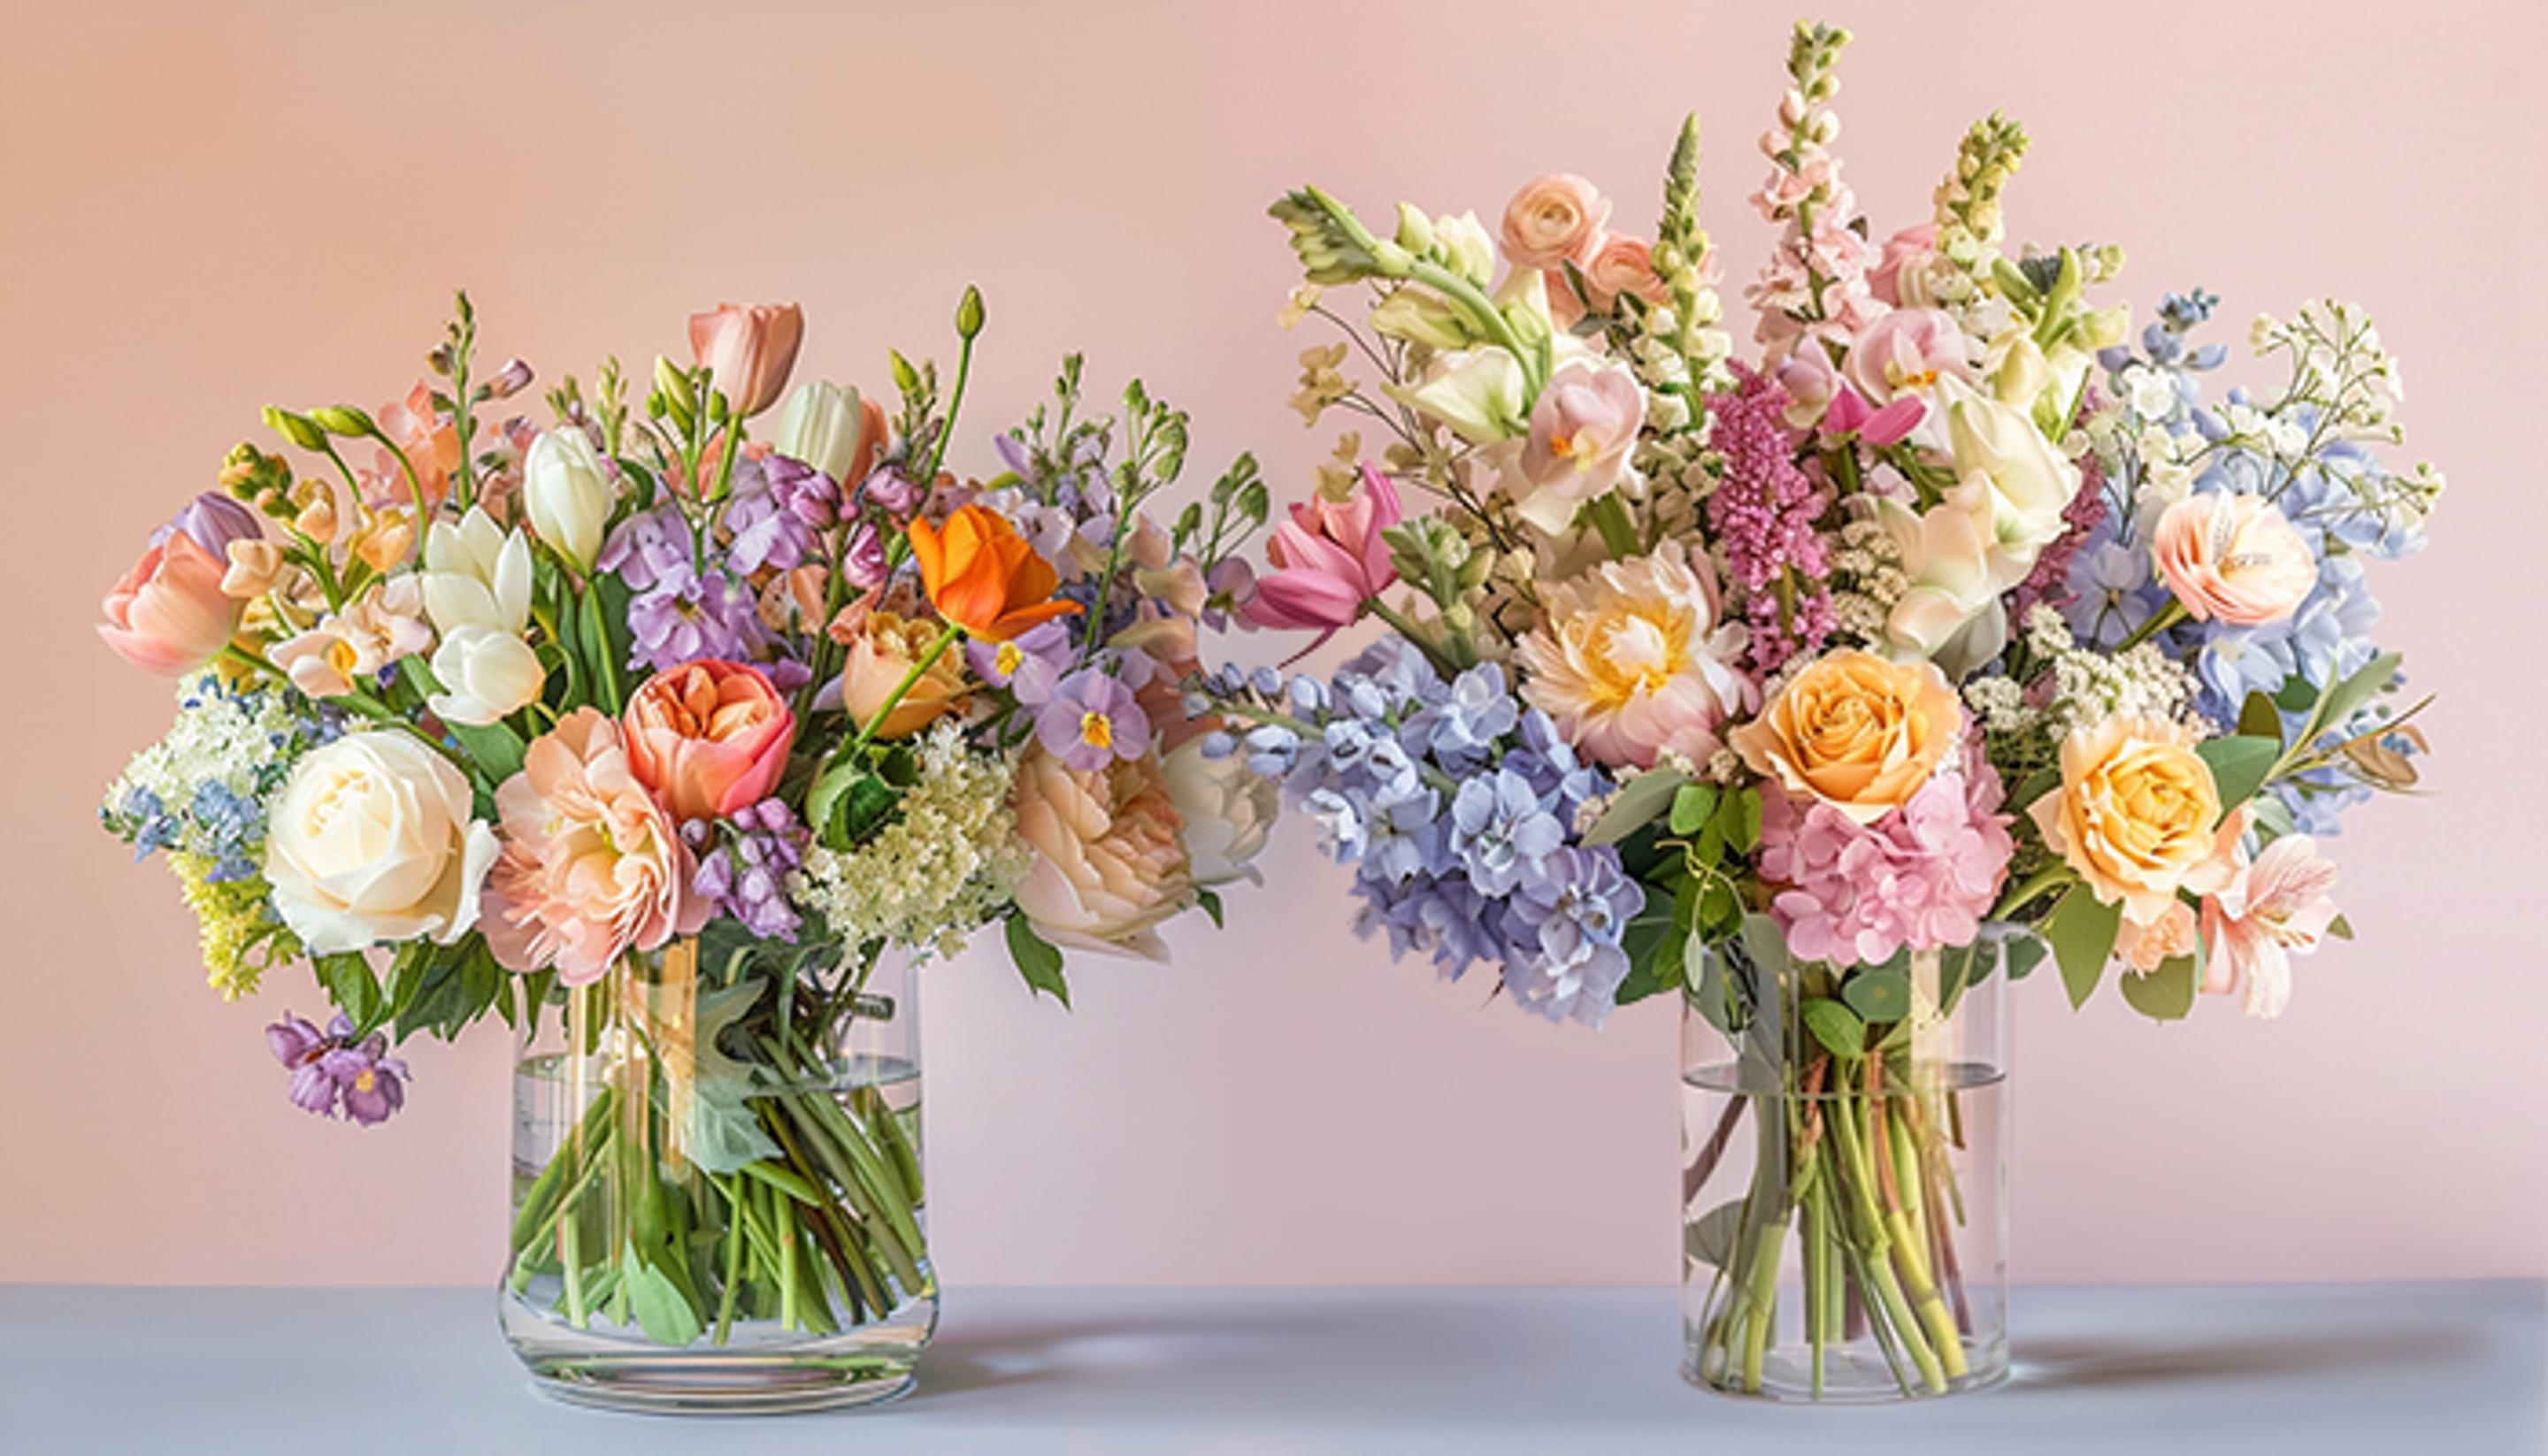 Two Vibrant Mother's Day Flower Arrangements